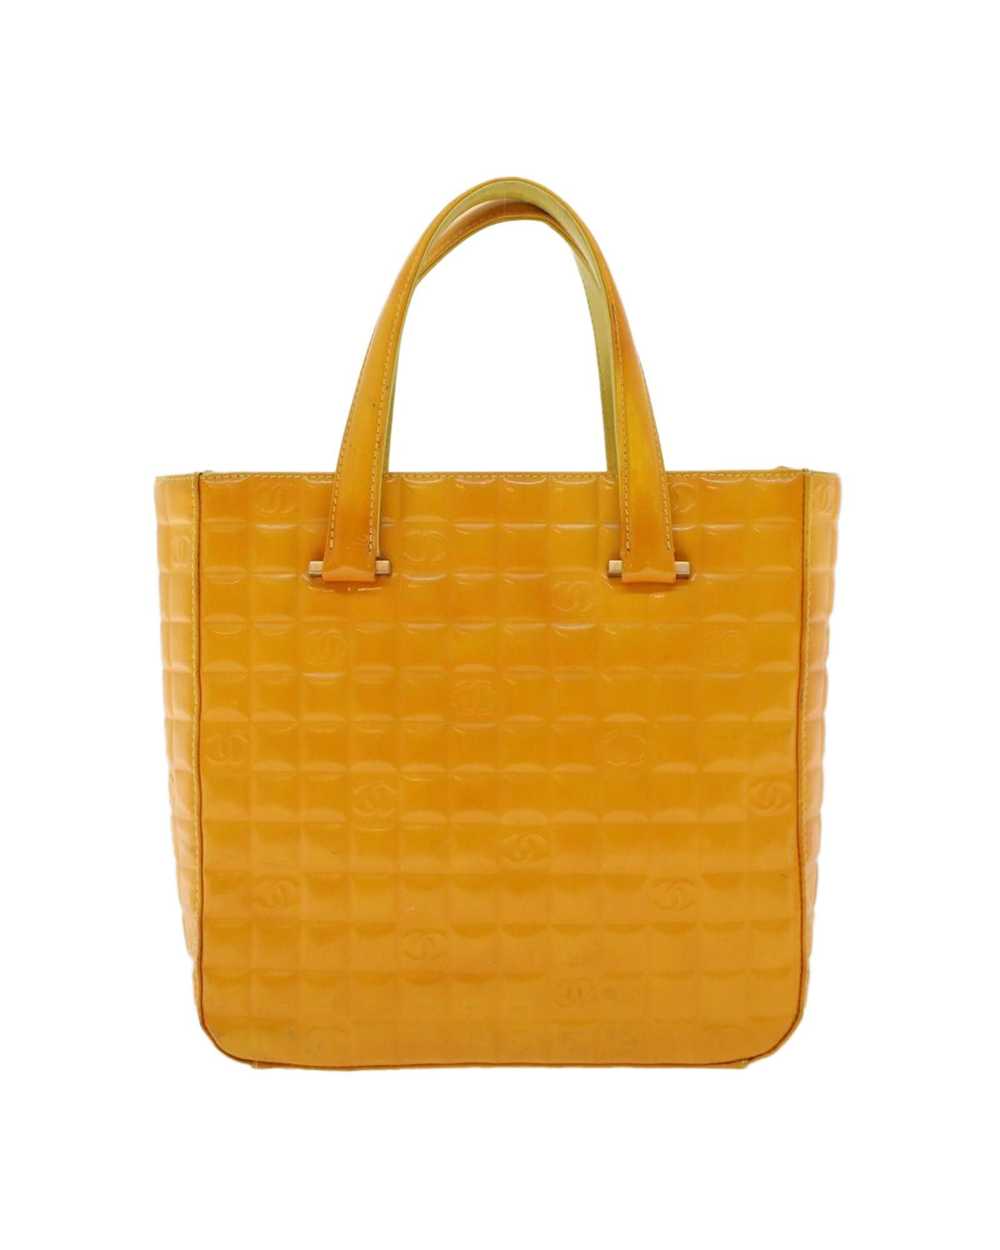 Chanel Yellow Patent Leather Hand Bag - image 2